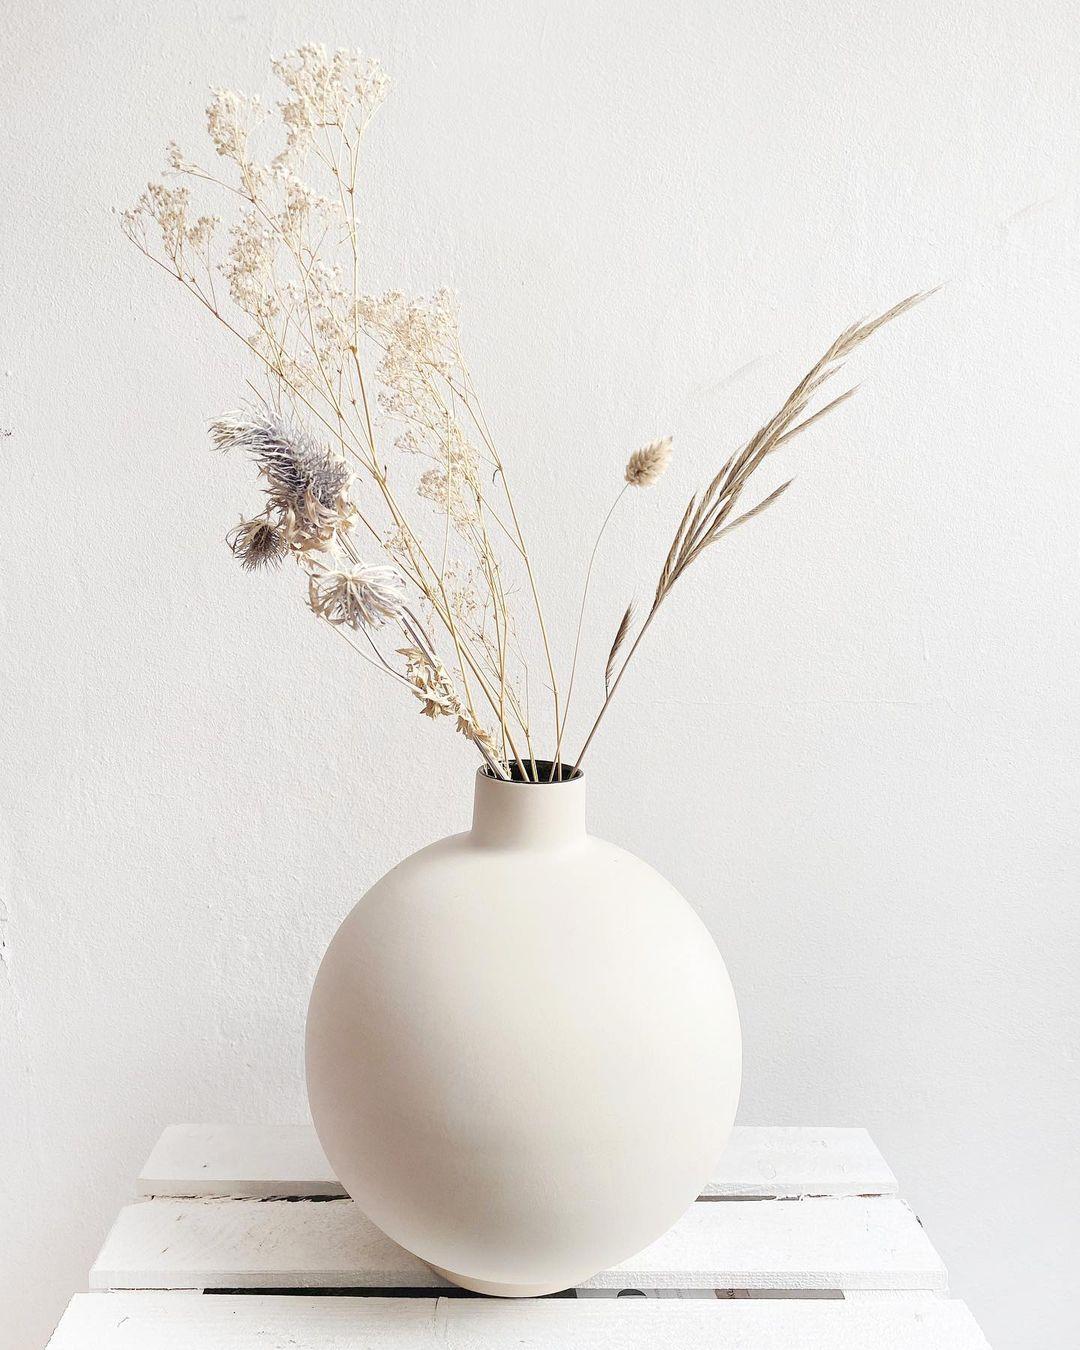 Irena black vase by Malwina Konopacka
Materials: Ceramic
Dimensions: ø 20 x 25 cm

Comes in a simple and compact spherical shape topped by a stout cylindrical neck. Made from non-refractory ceramics it offers great opportunities to exhibit